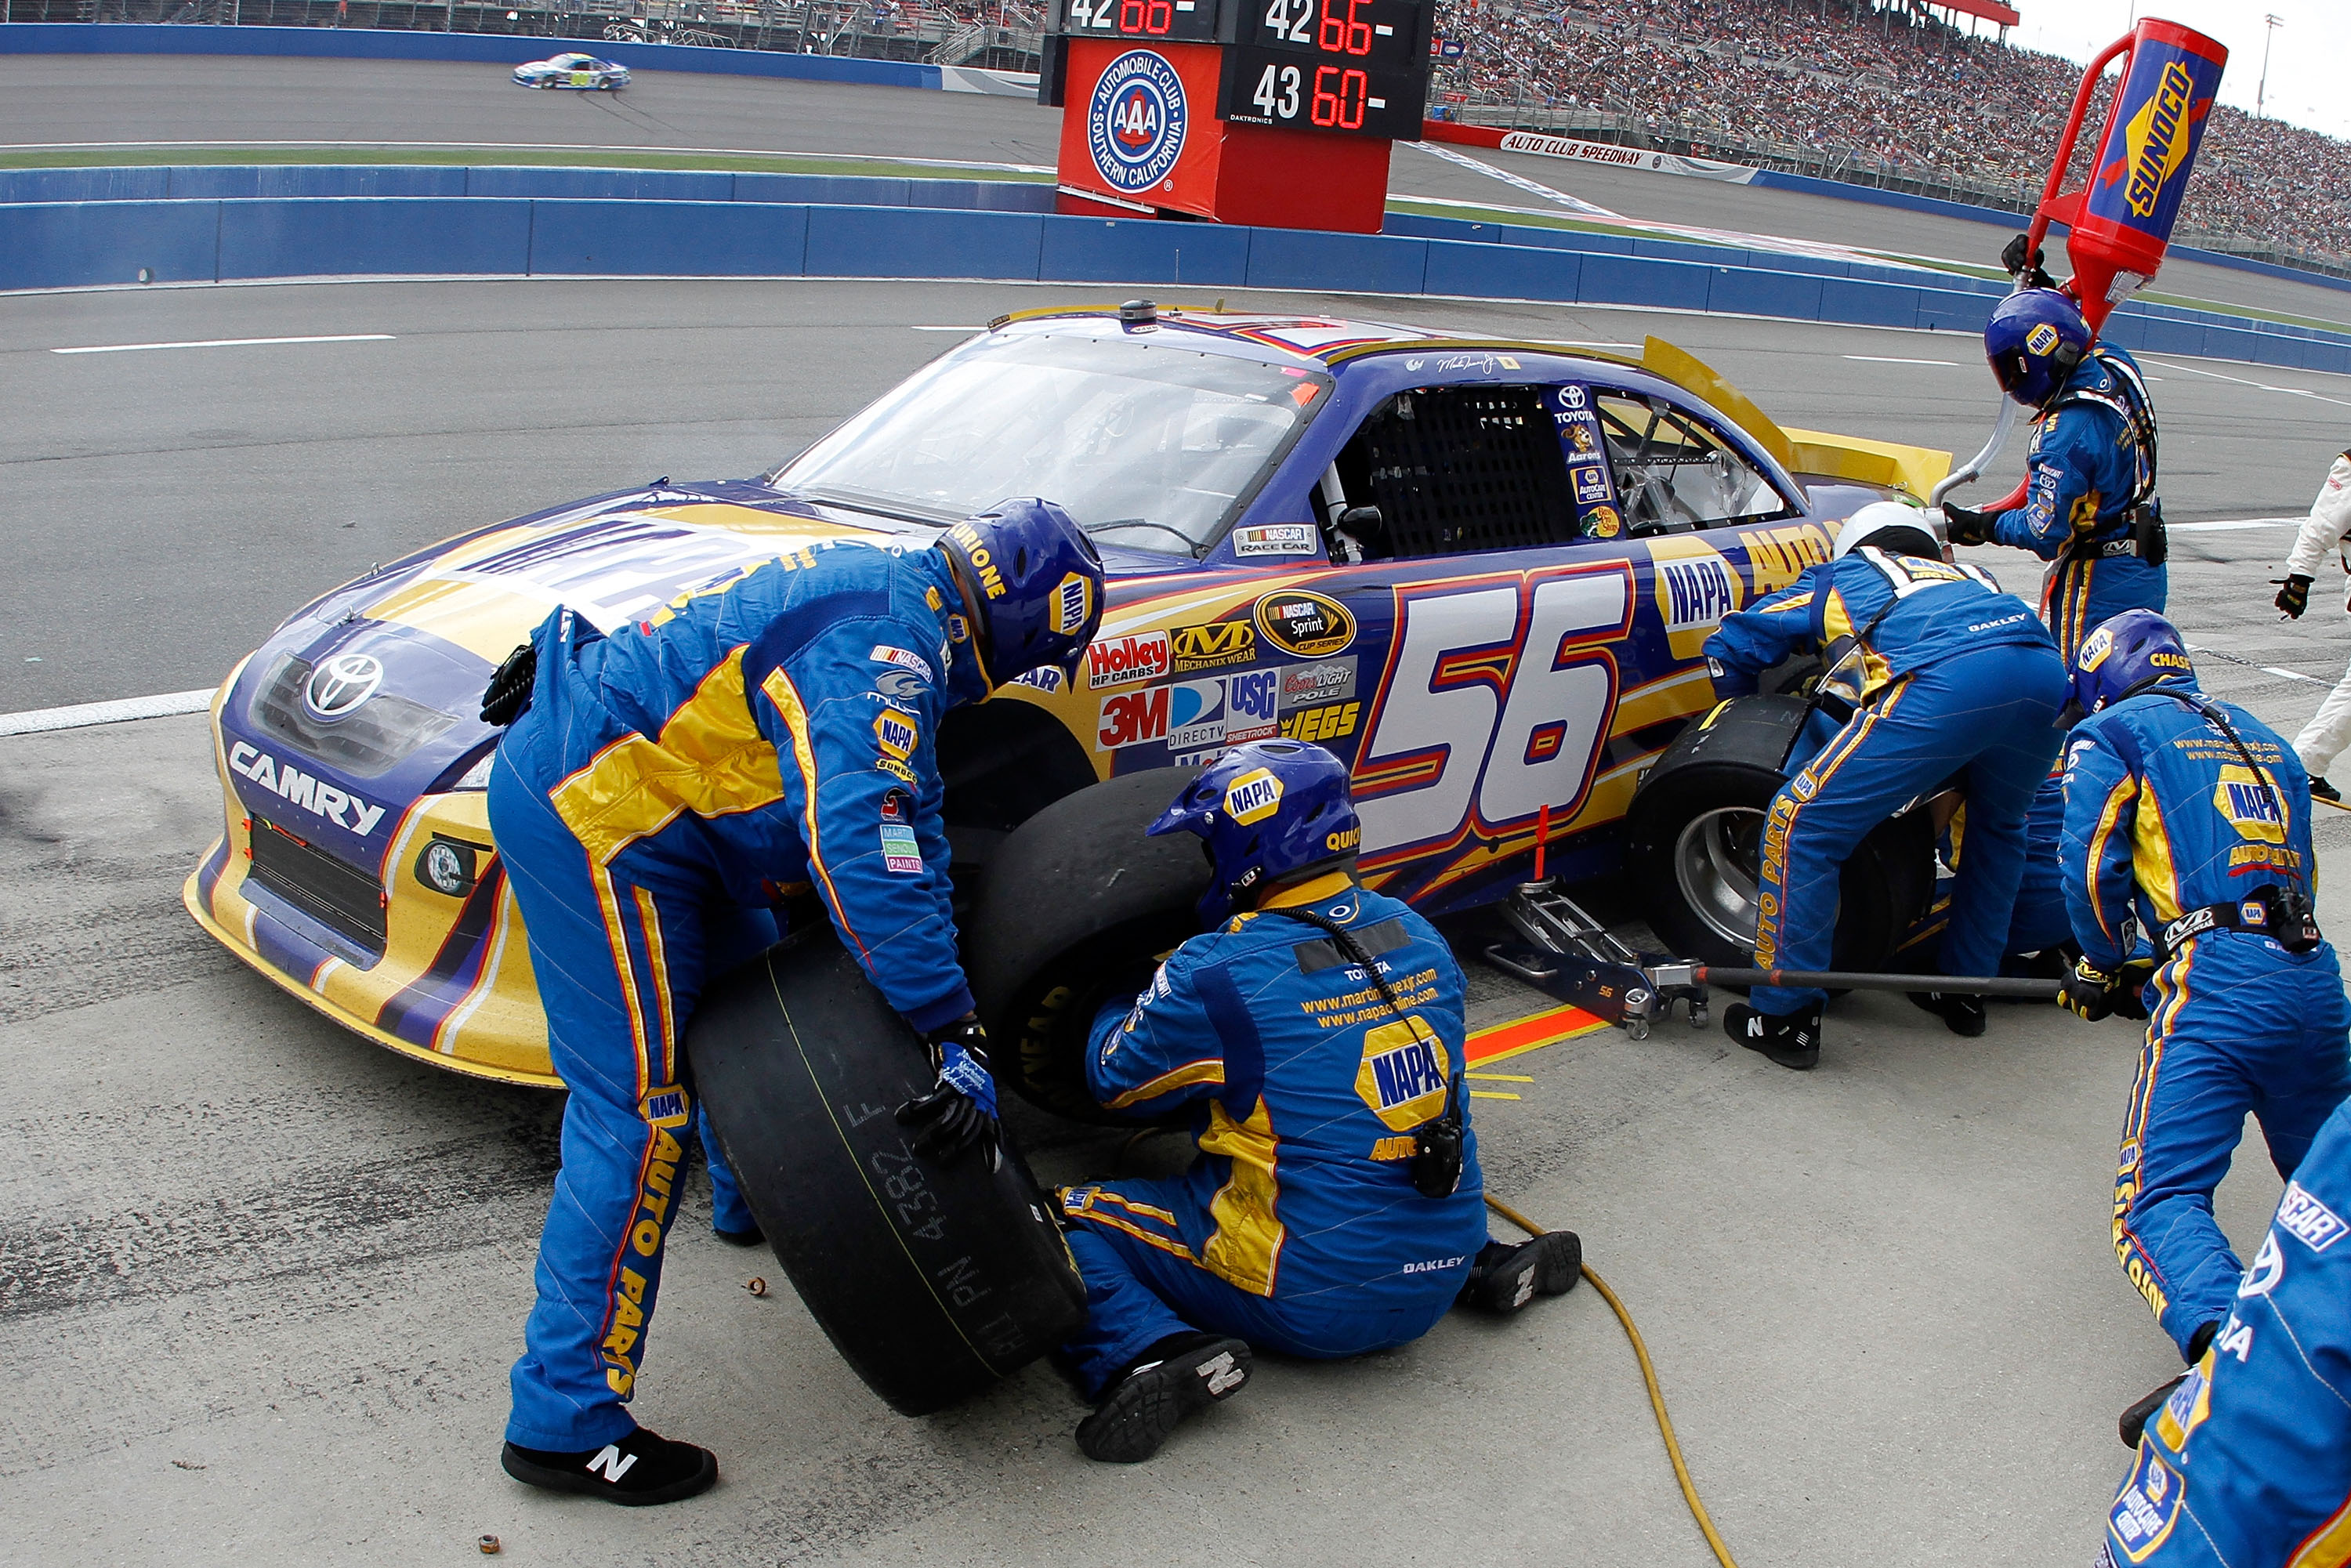 FONTANA, CA - MARCH 27:  Martin Truex Jr., driver of the #56 NAPA Toyota, makes a pit stop during the NASCAR Sprint Cup Series Auto Club 400 at Auto Club Speedway on March 27, 2011 in Fontana, California.  (Photo by Jason Smith/Getty Images for NASCAR)